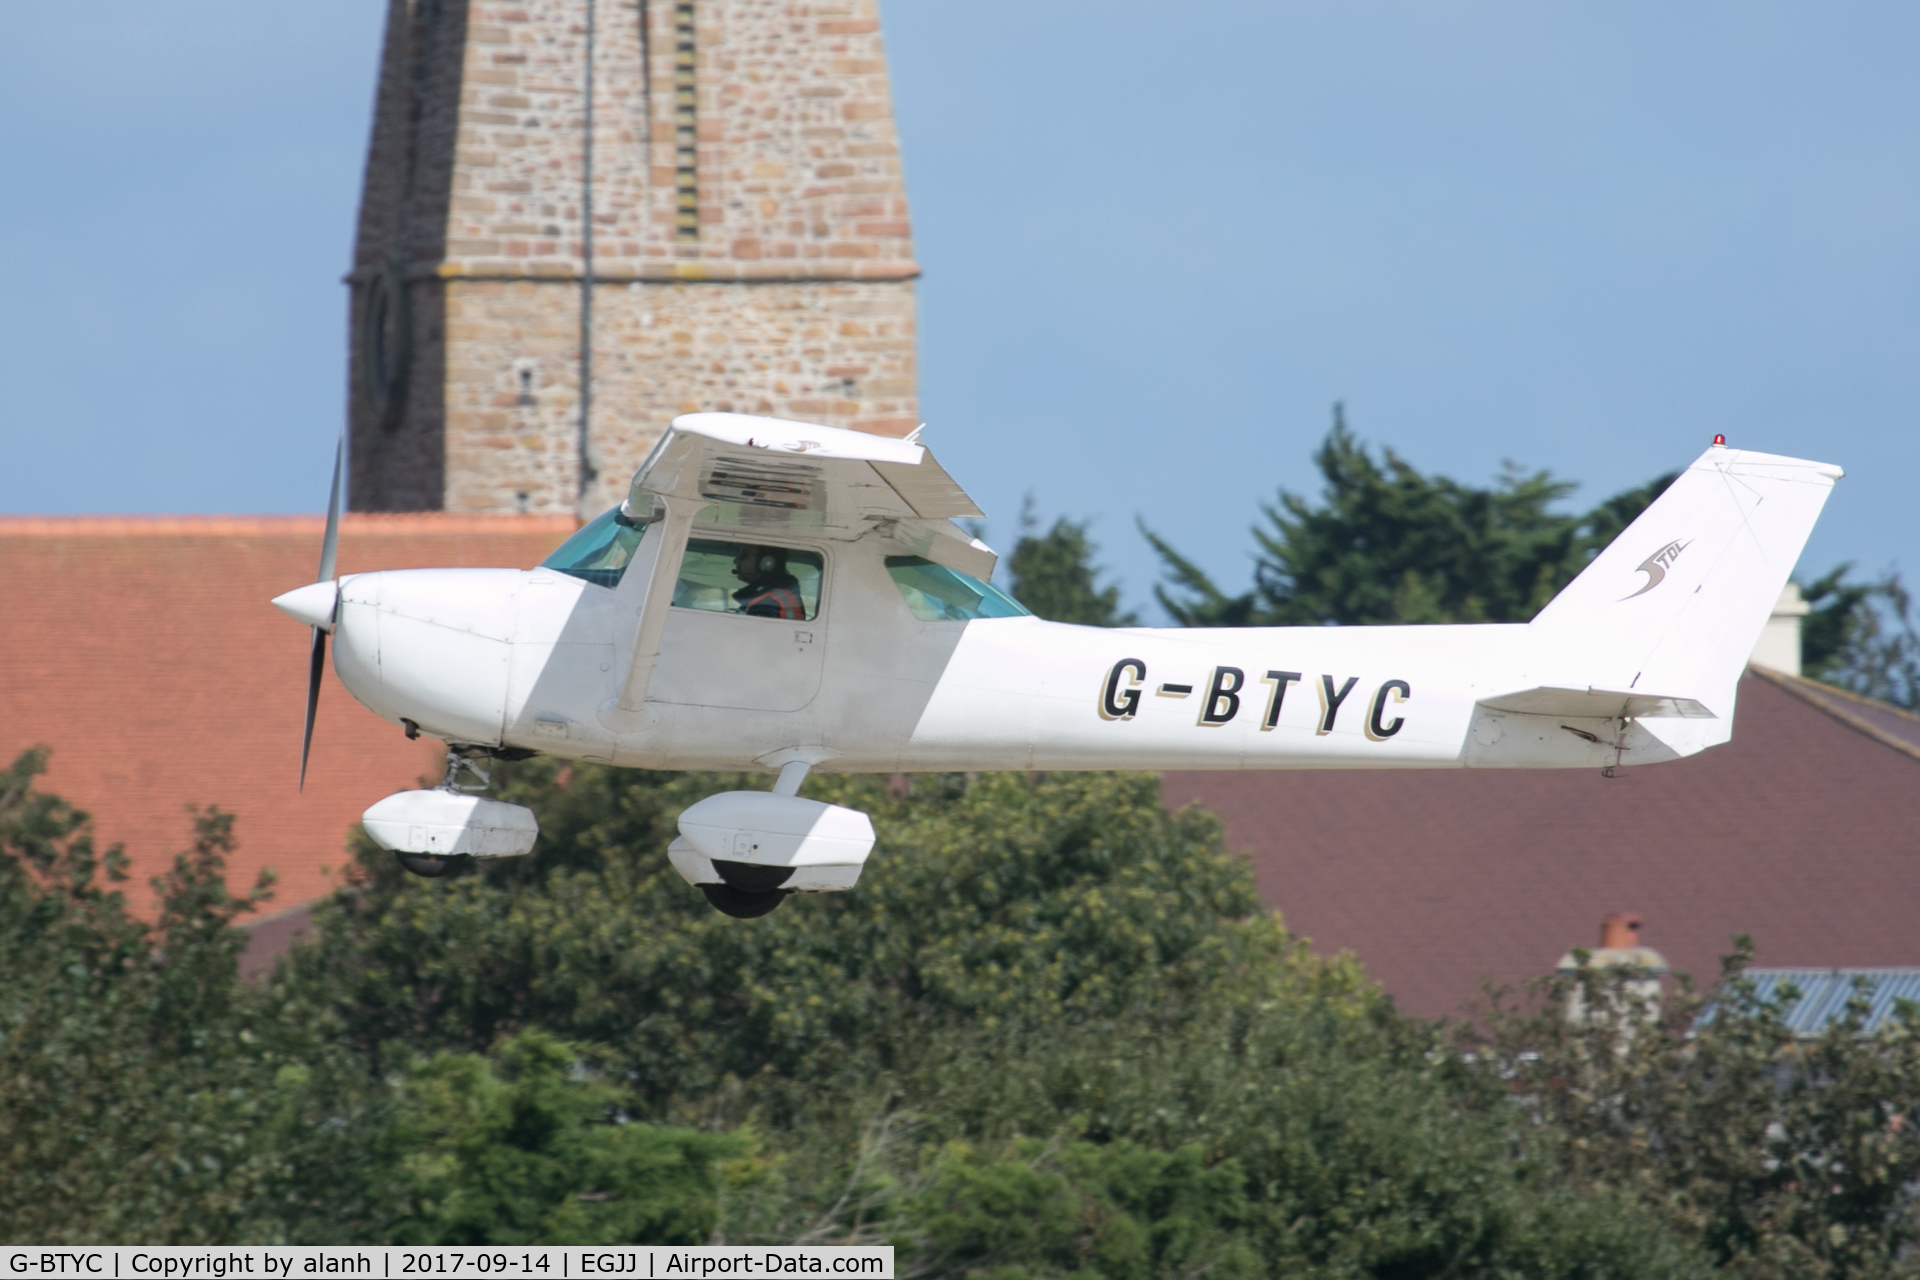 G-BTYC, 1975 Cessna 150L C/N 150-75767, Short finals for 26 in Jersey